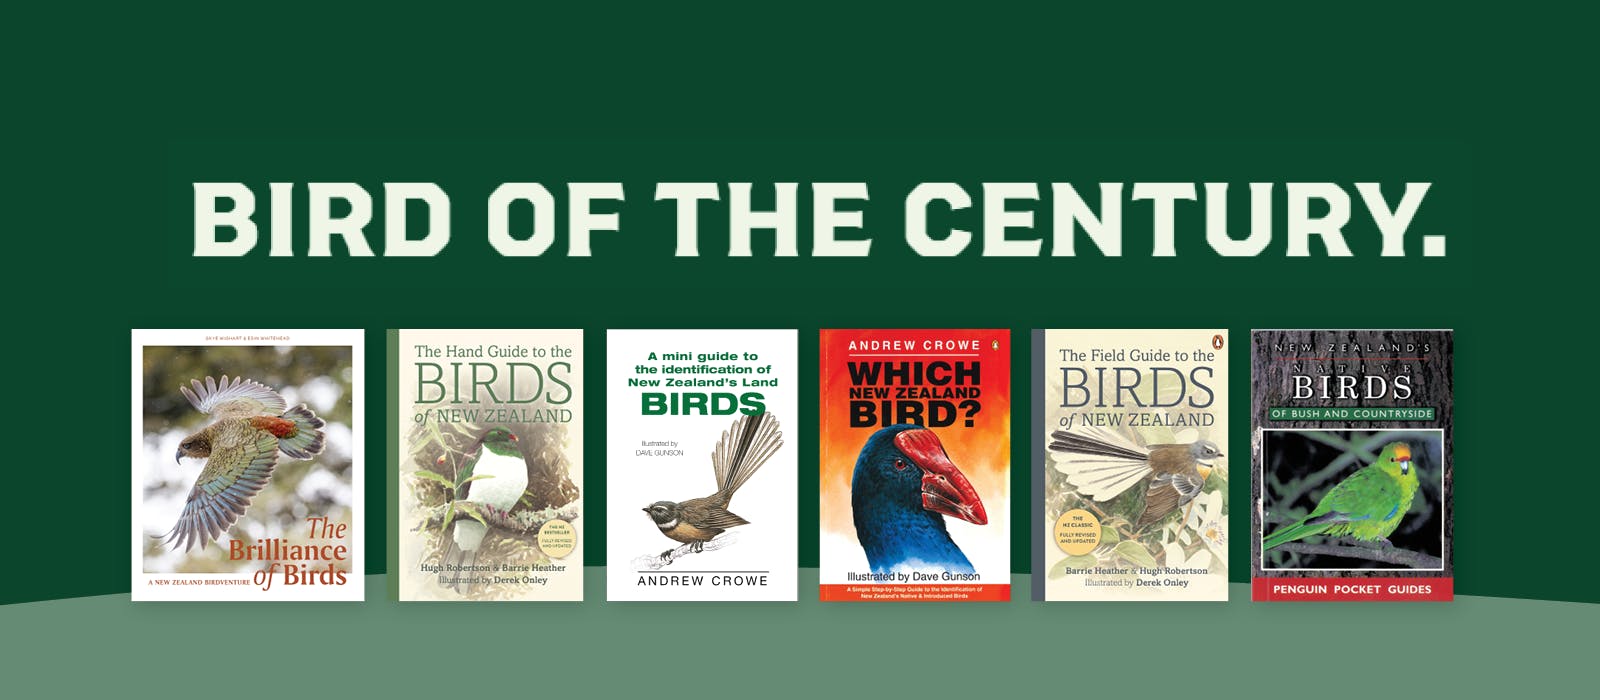 Who are you voting for in New Zealand Bird of the Century?